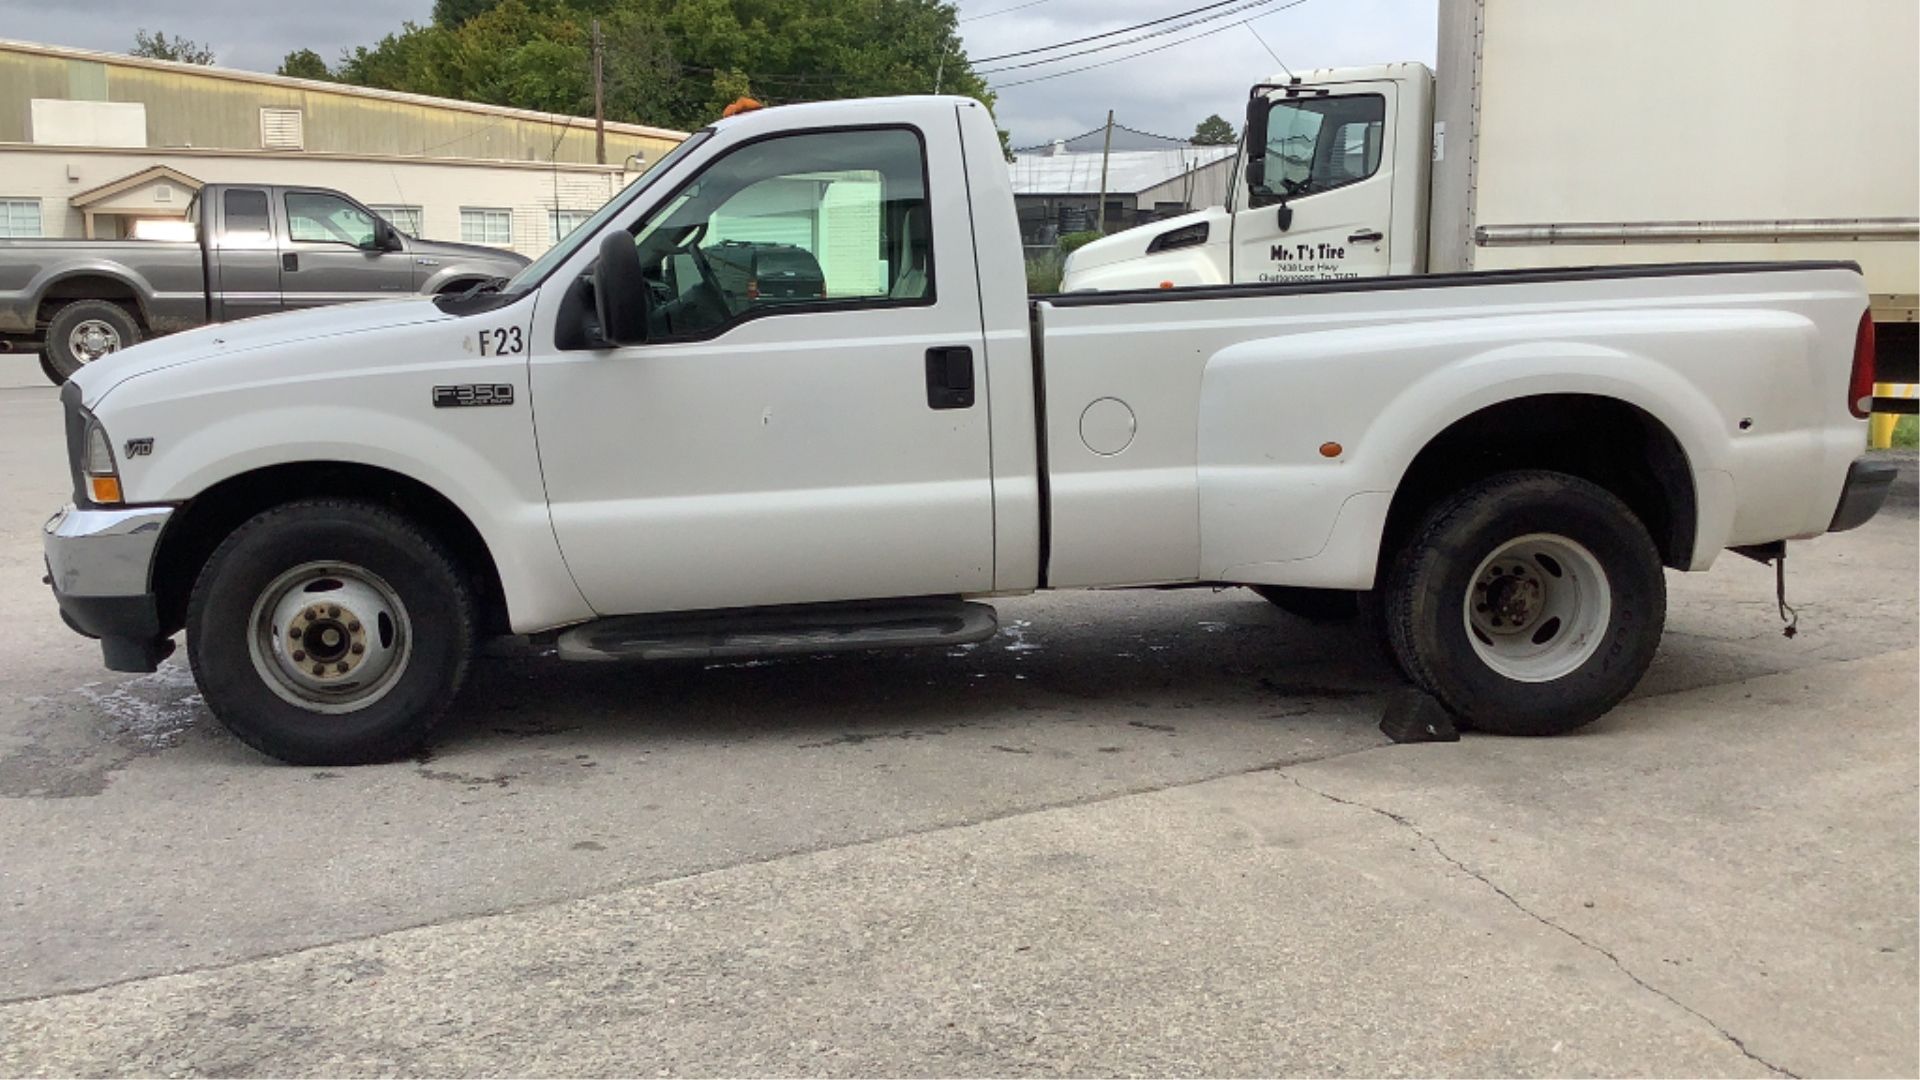 2002 Ford F-350 Regular Cab Dually 2WD - Image 11 of 89